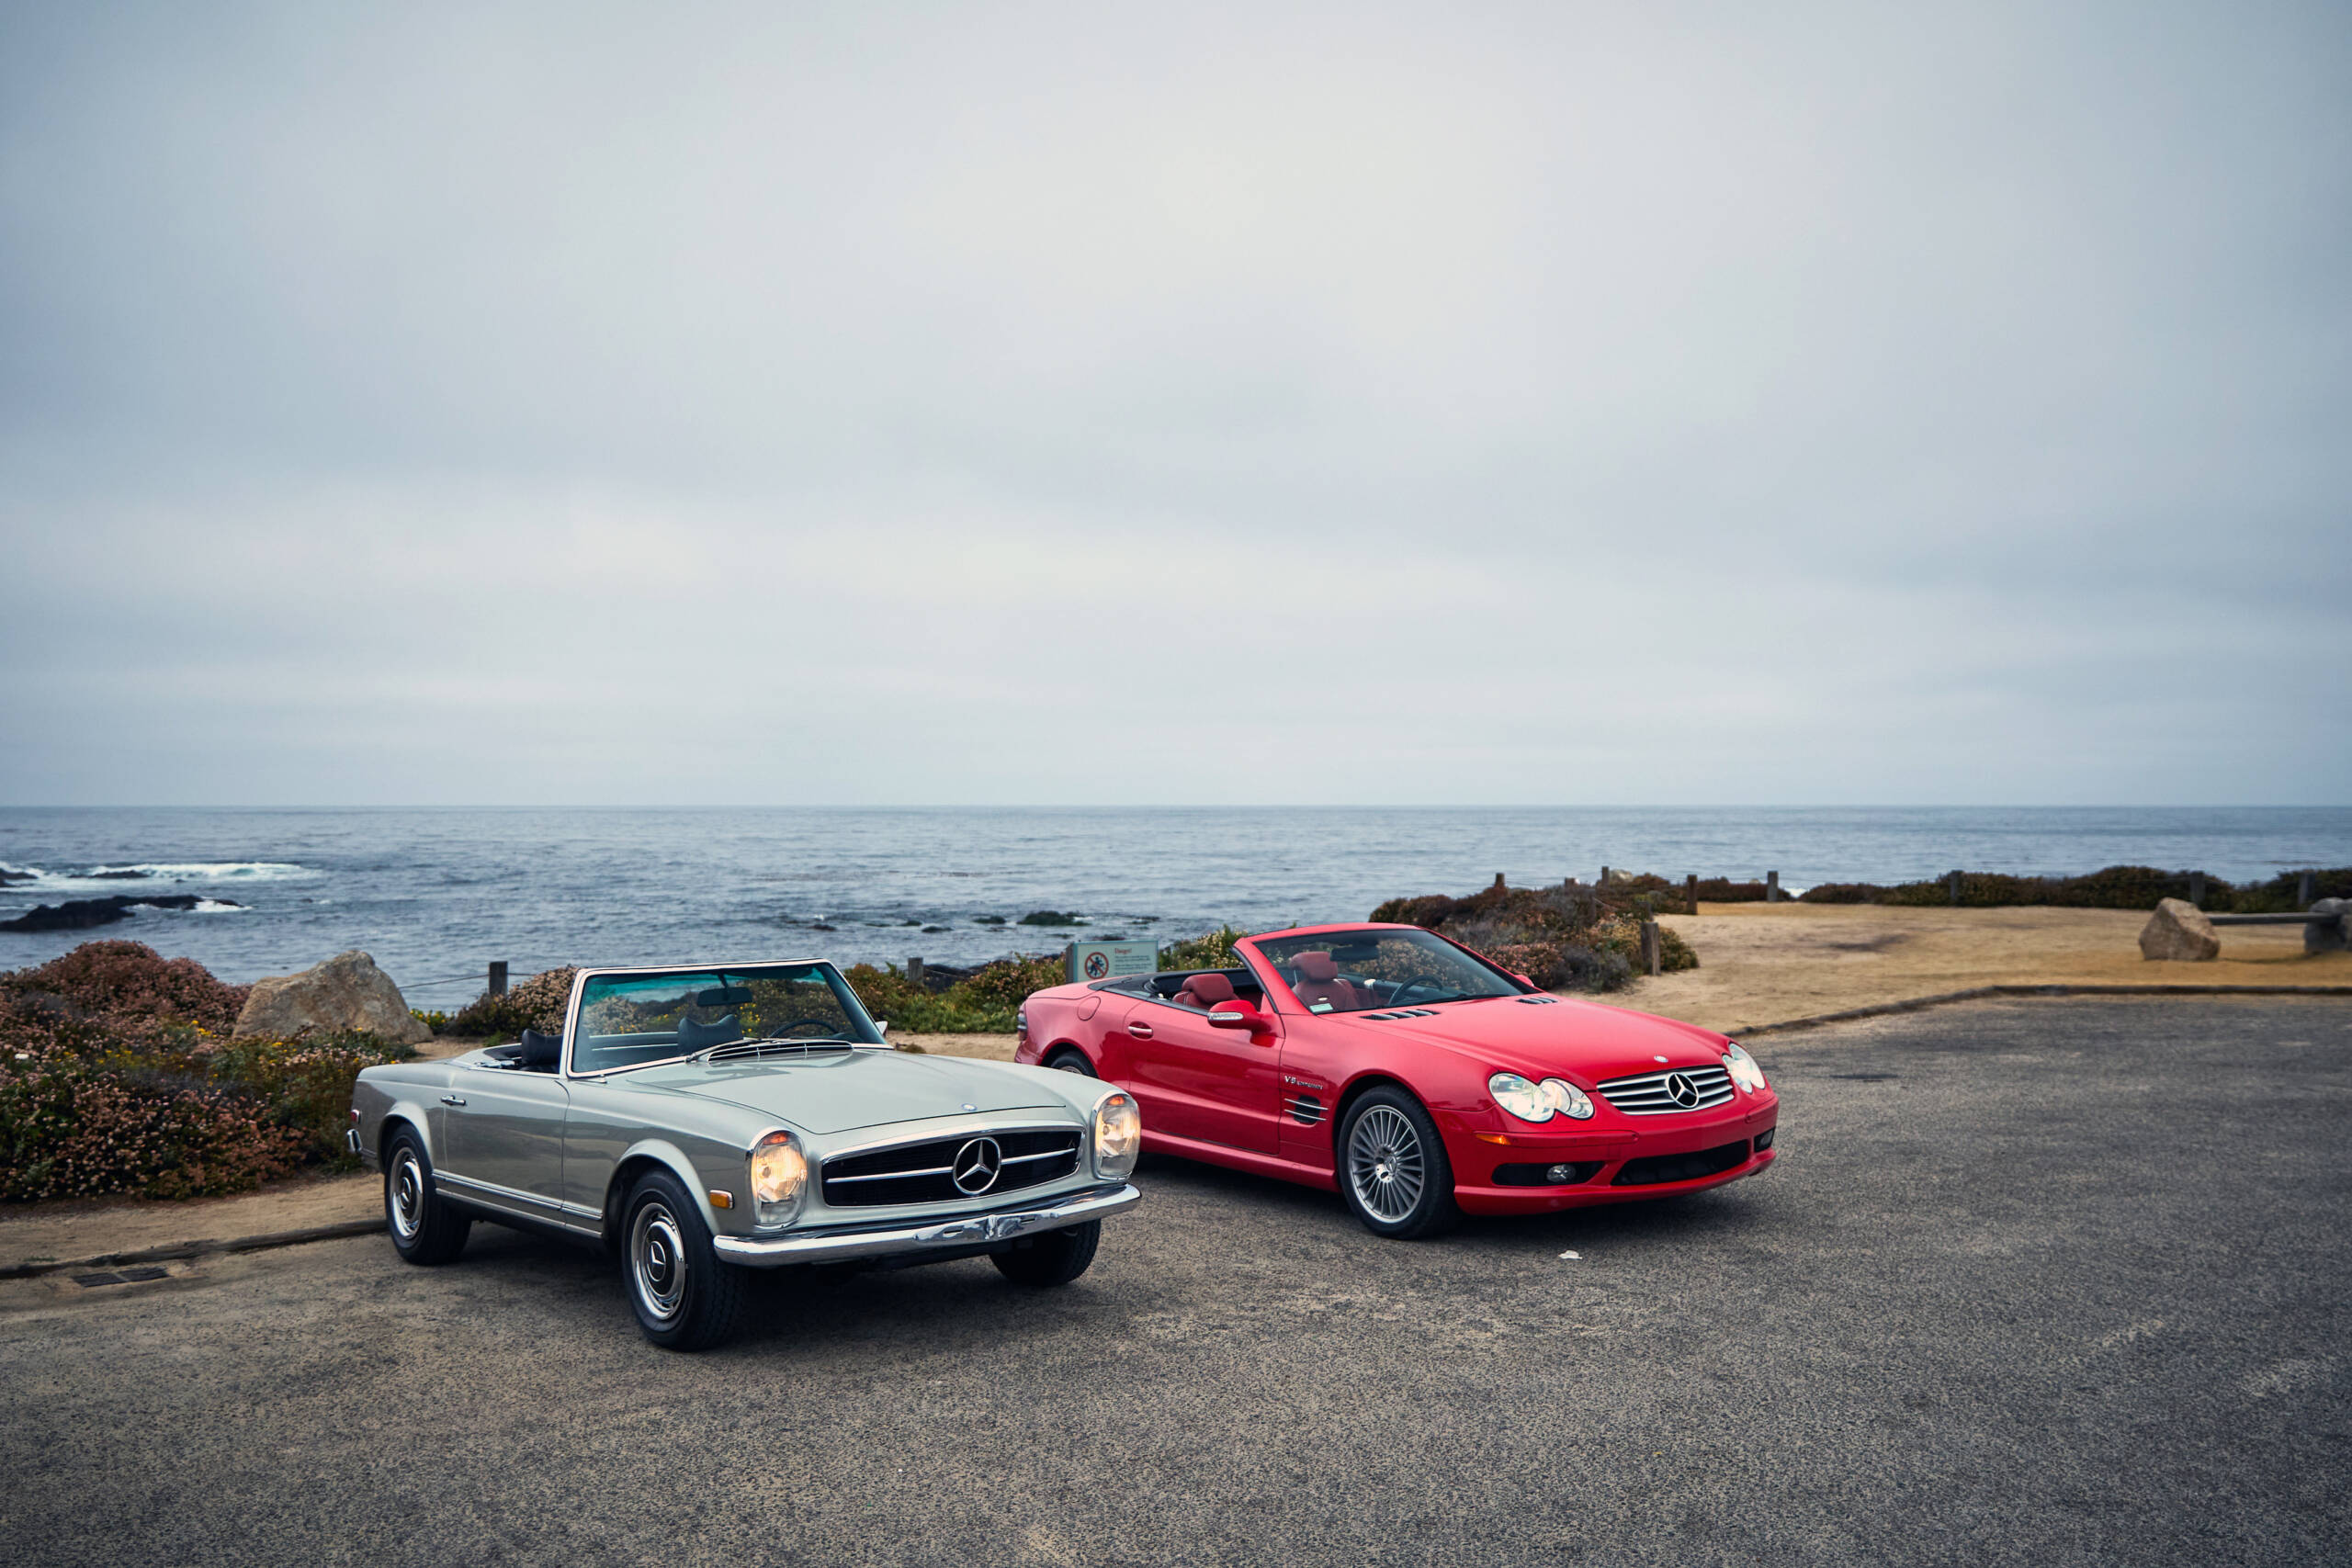 Mercedes-Benz Classic in the USA: Experts in the preservation, presentation and lived experience of heritage